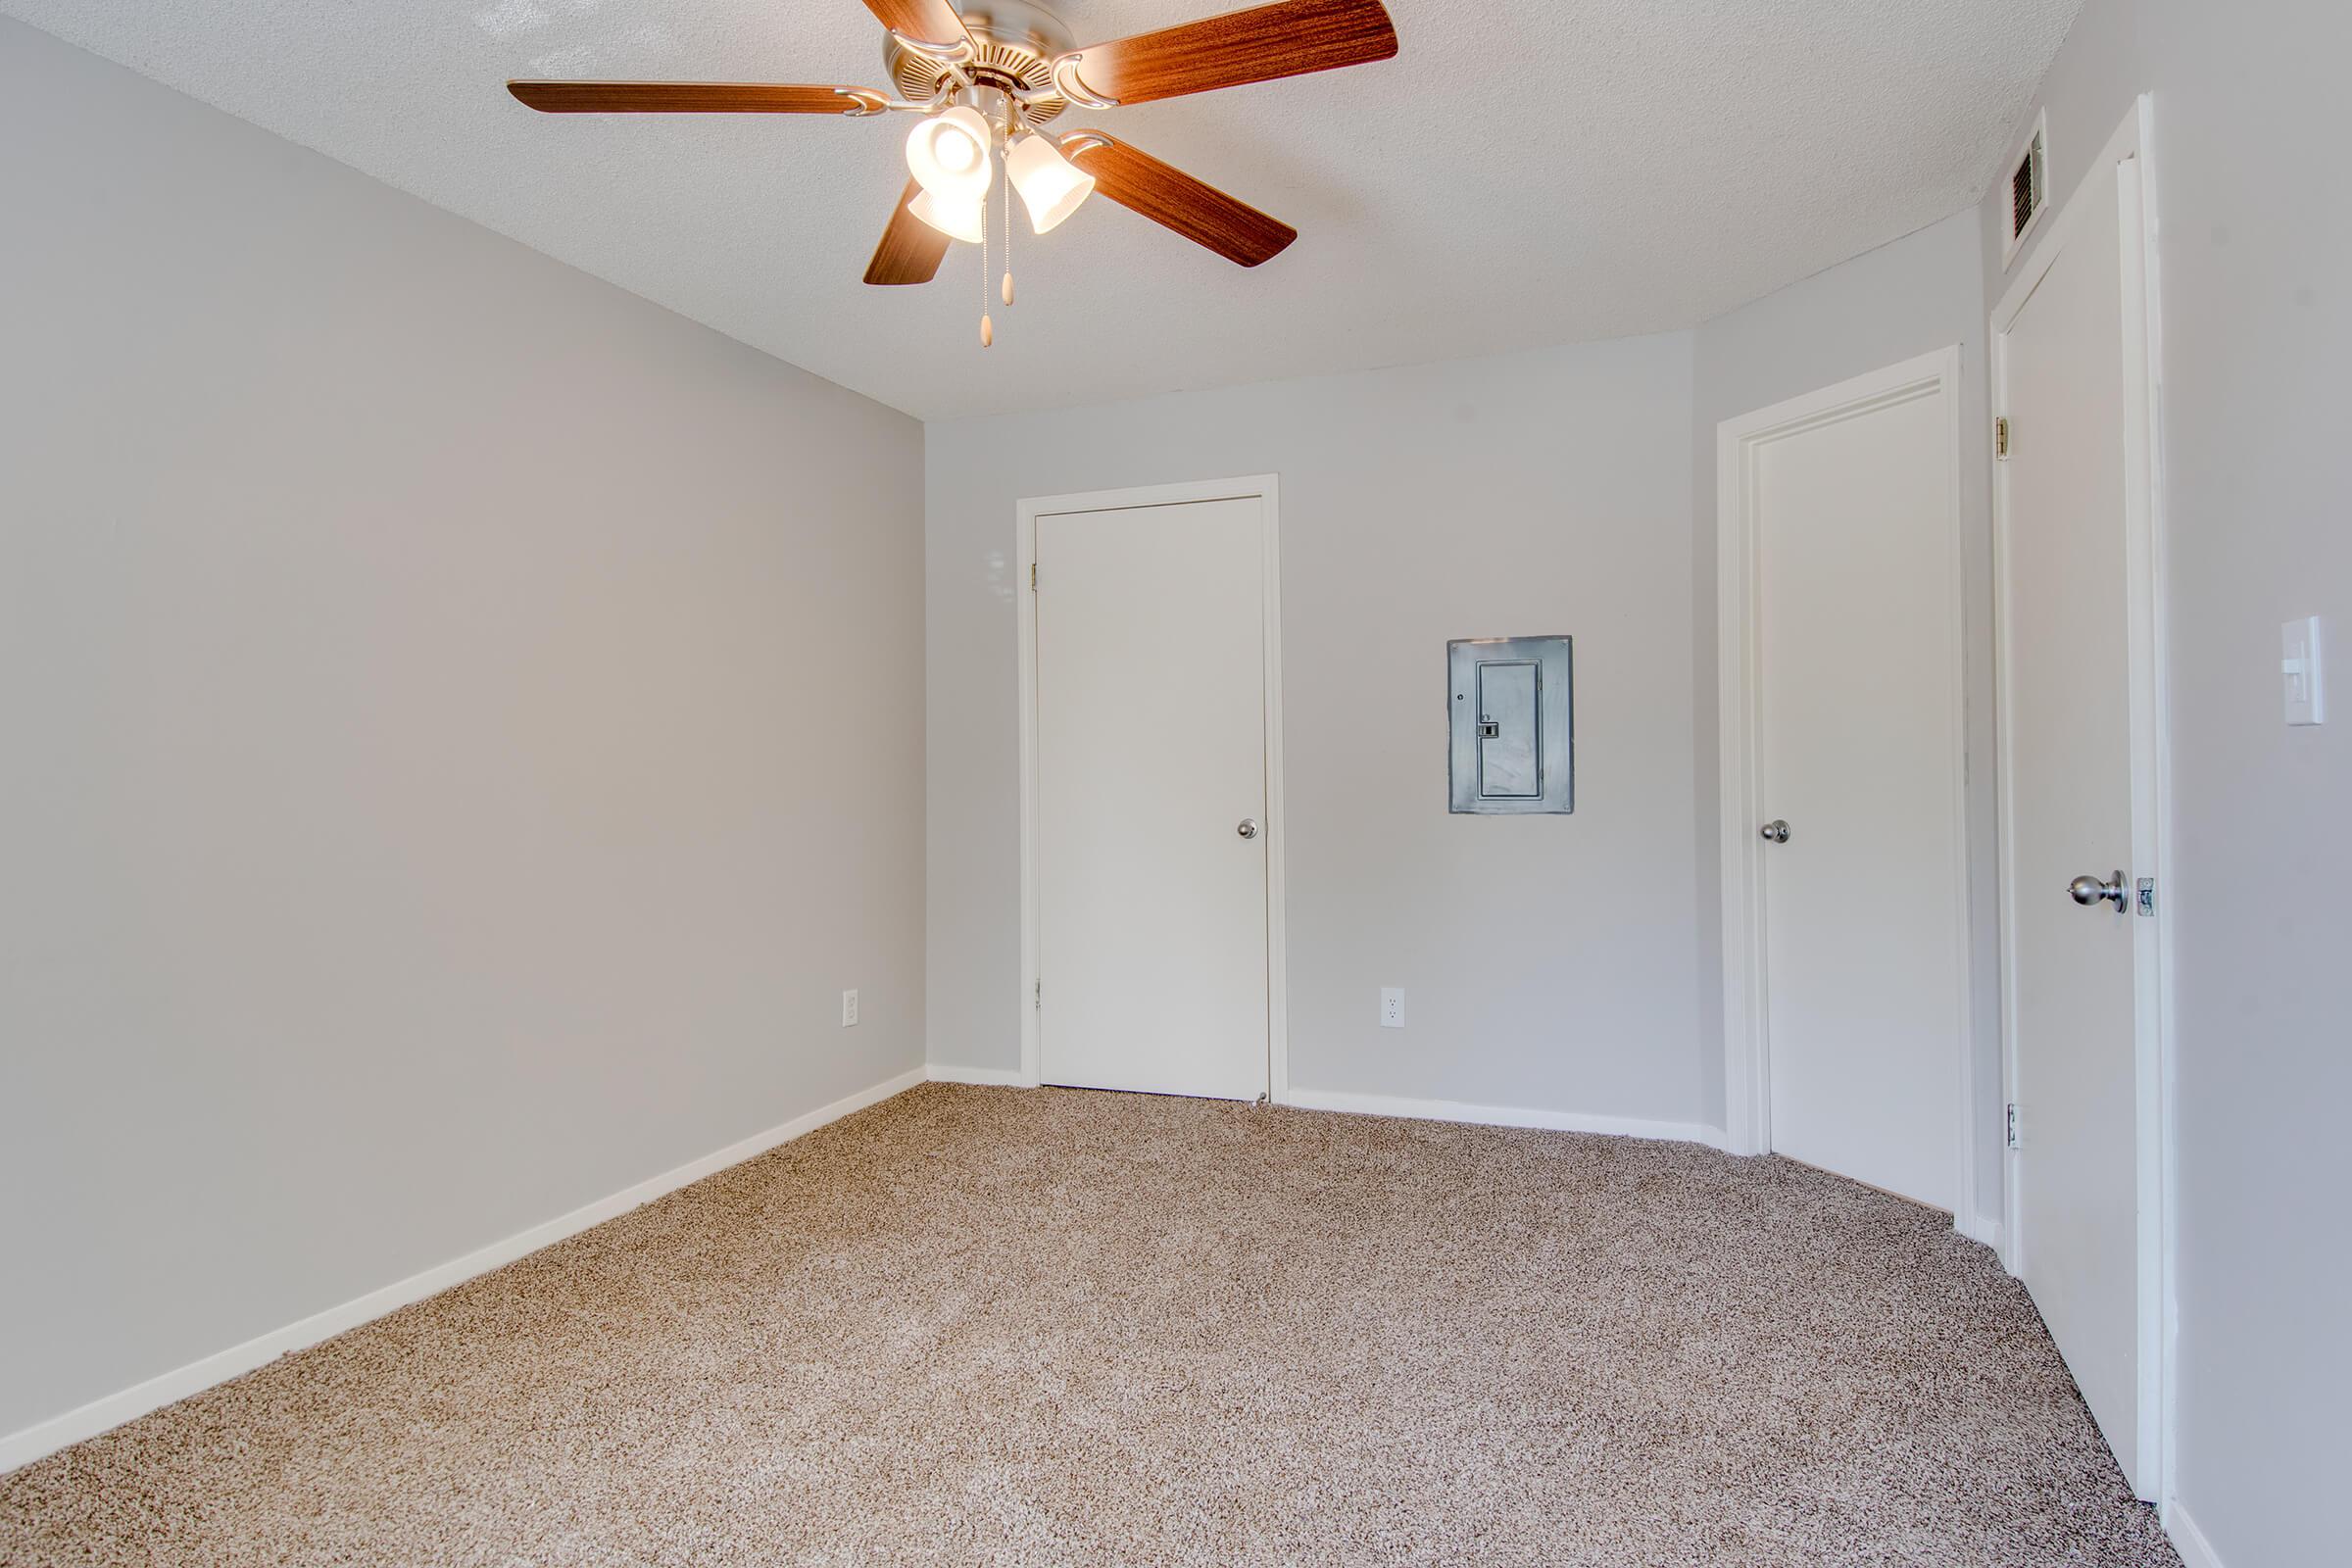 Carpeted Bedrooms at Northridge Apartments